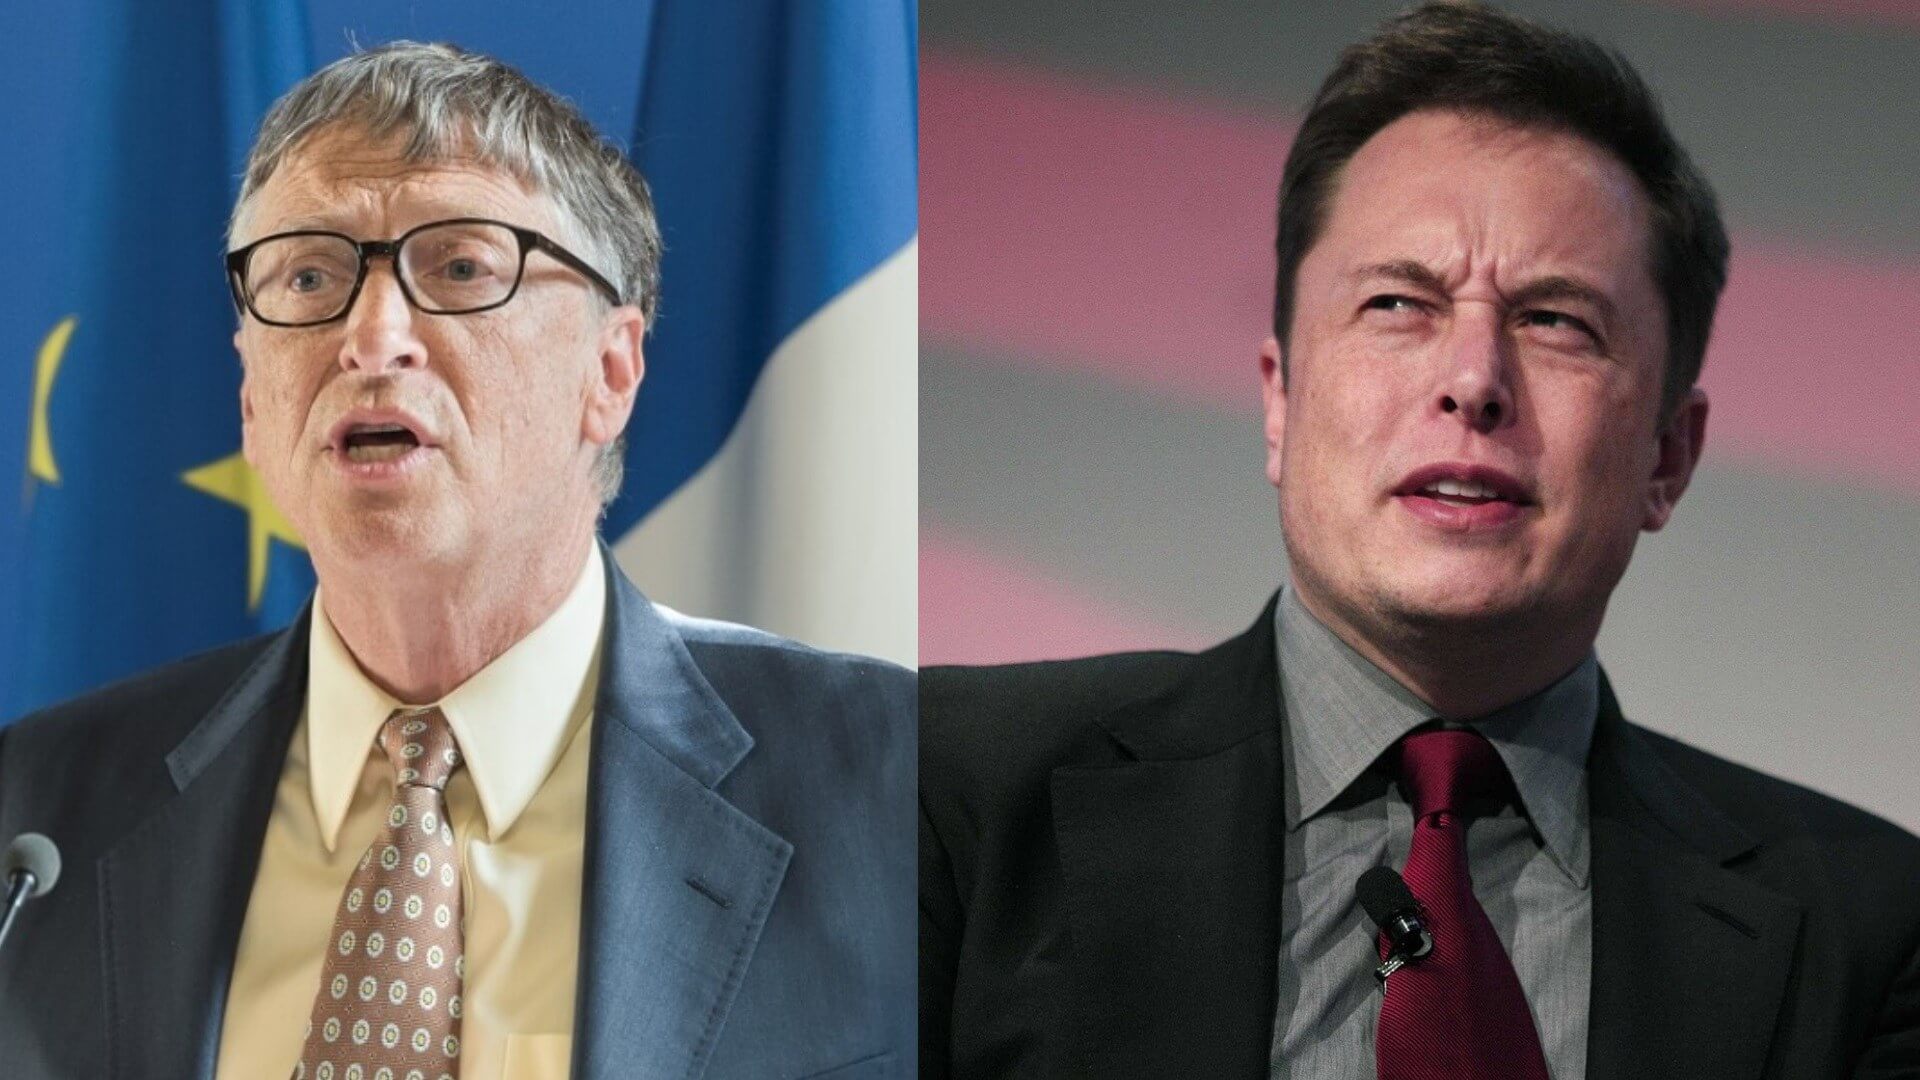 Elon Musk confirms he confronted Bill Gates about shorting Tesla stock